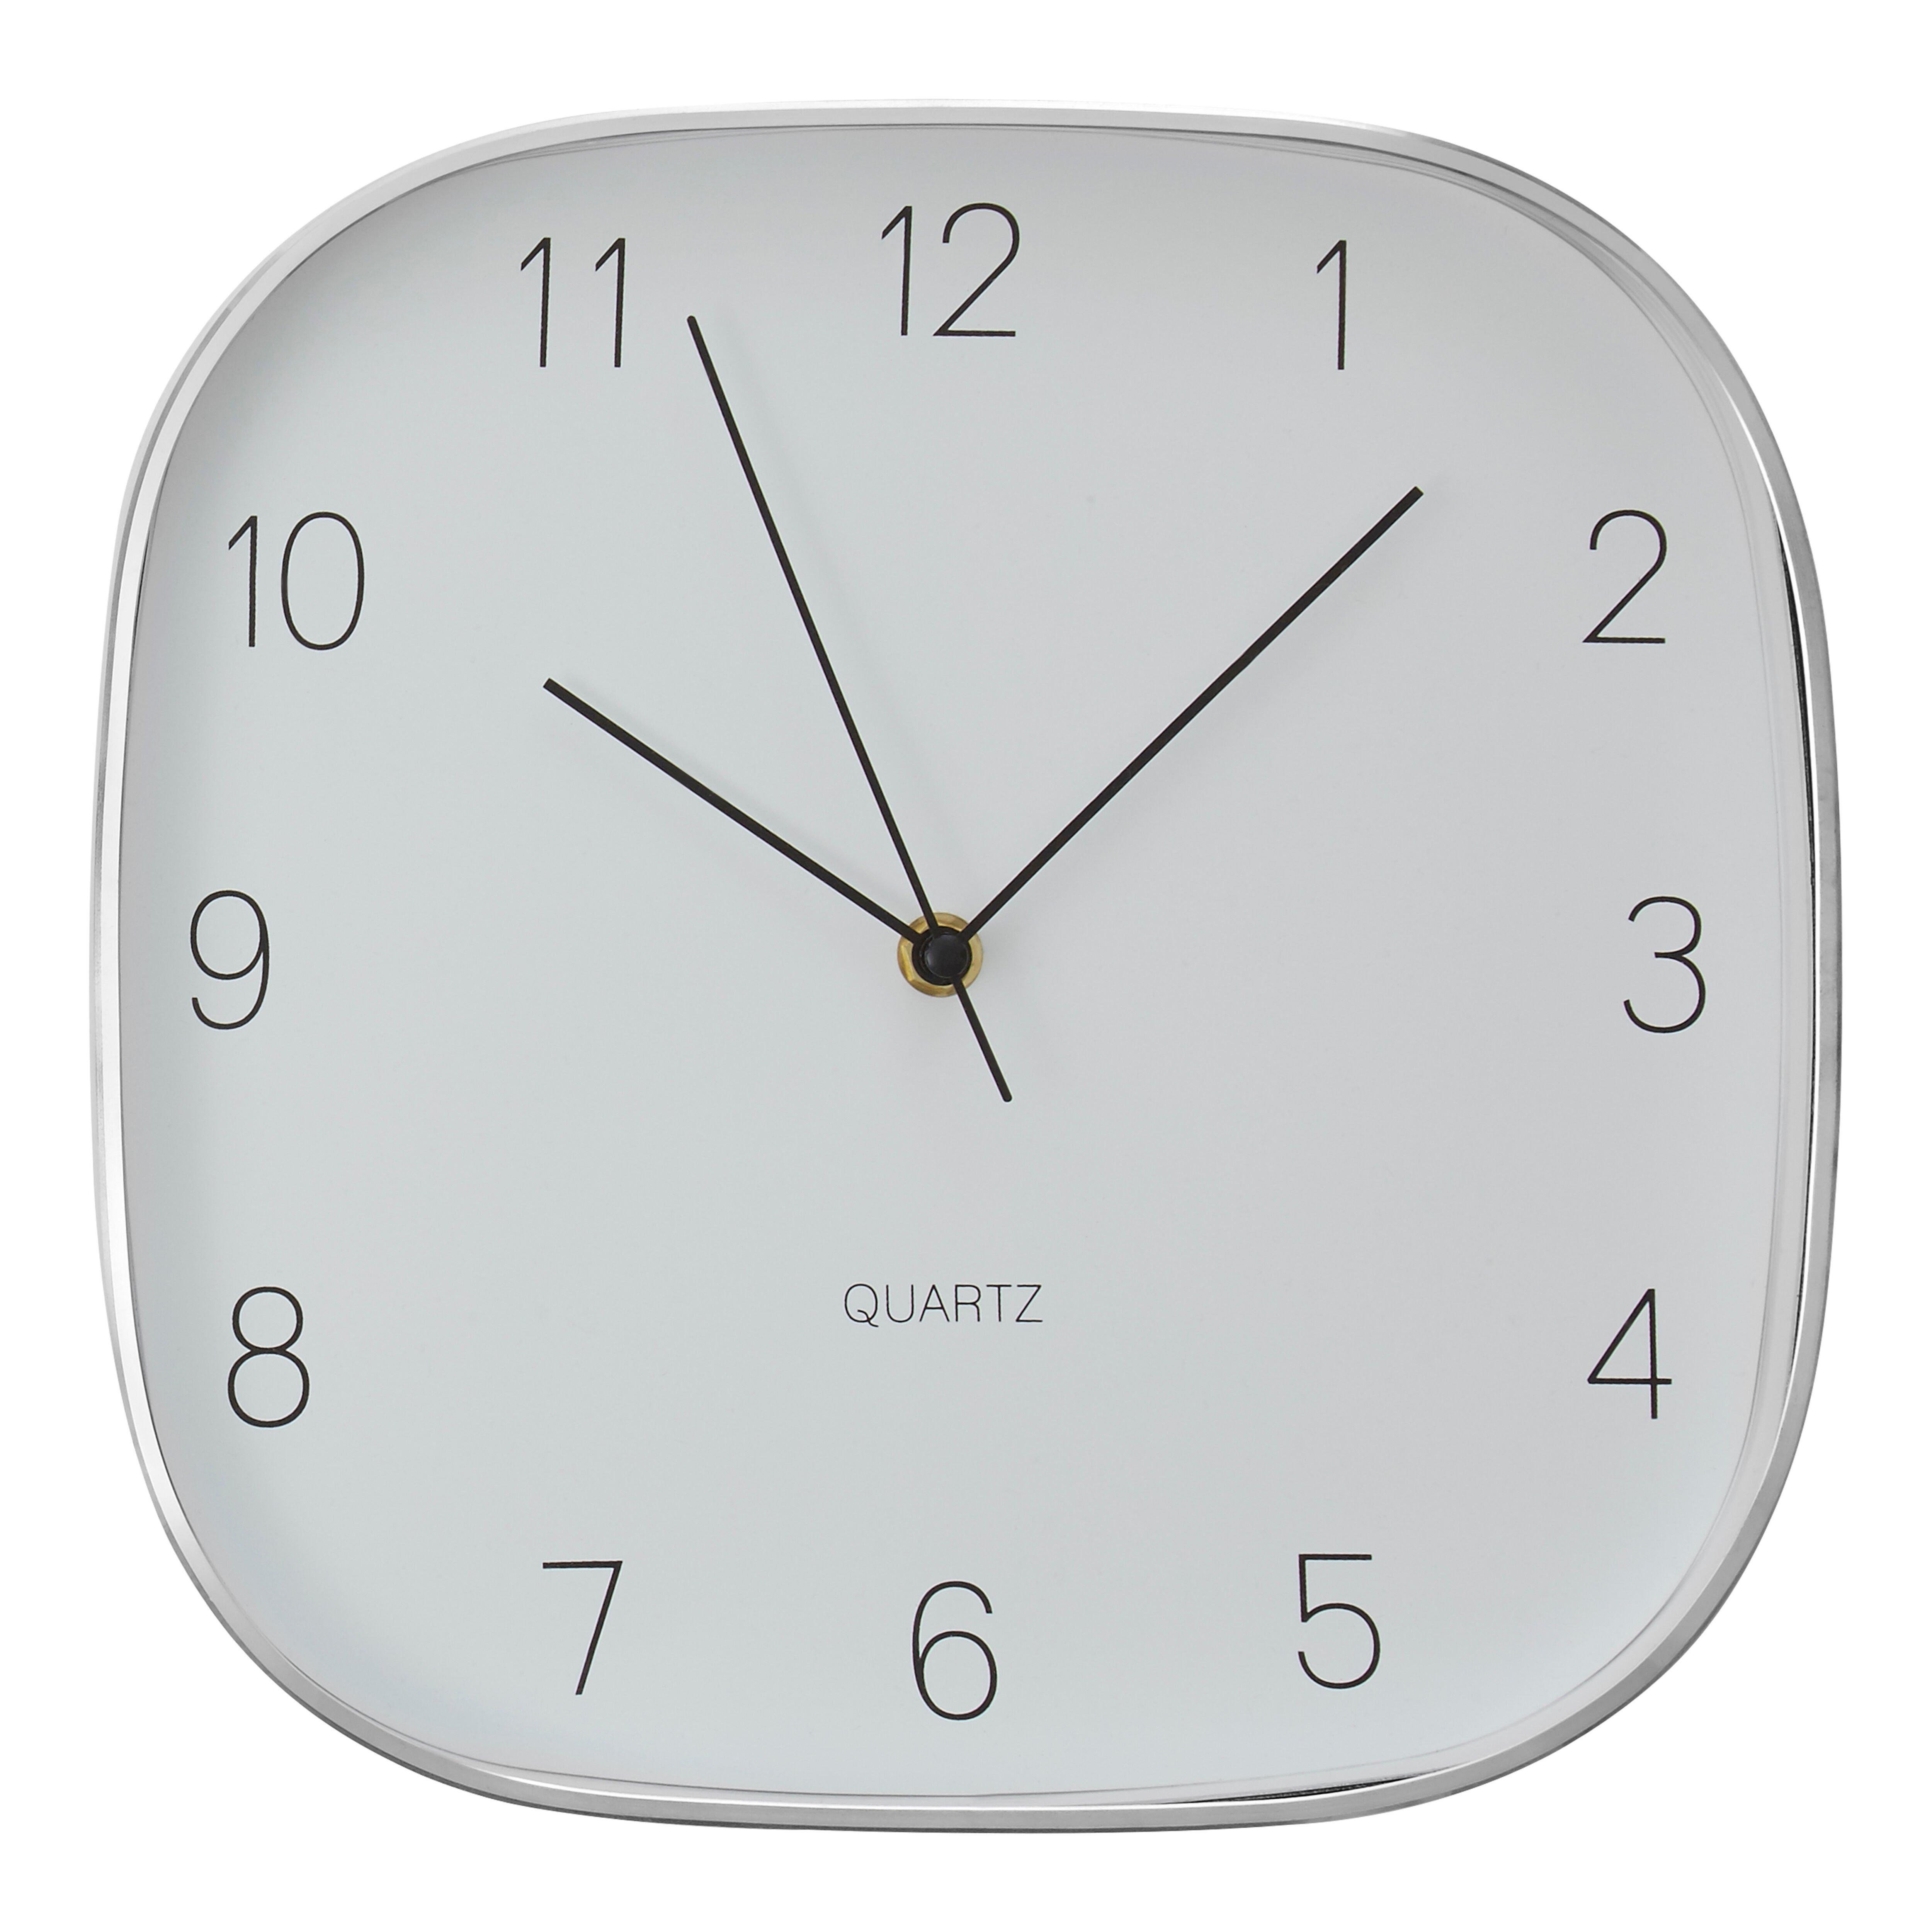 Interiors by Premier Elko Square Case Wall Clock - image 1